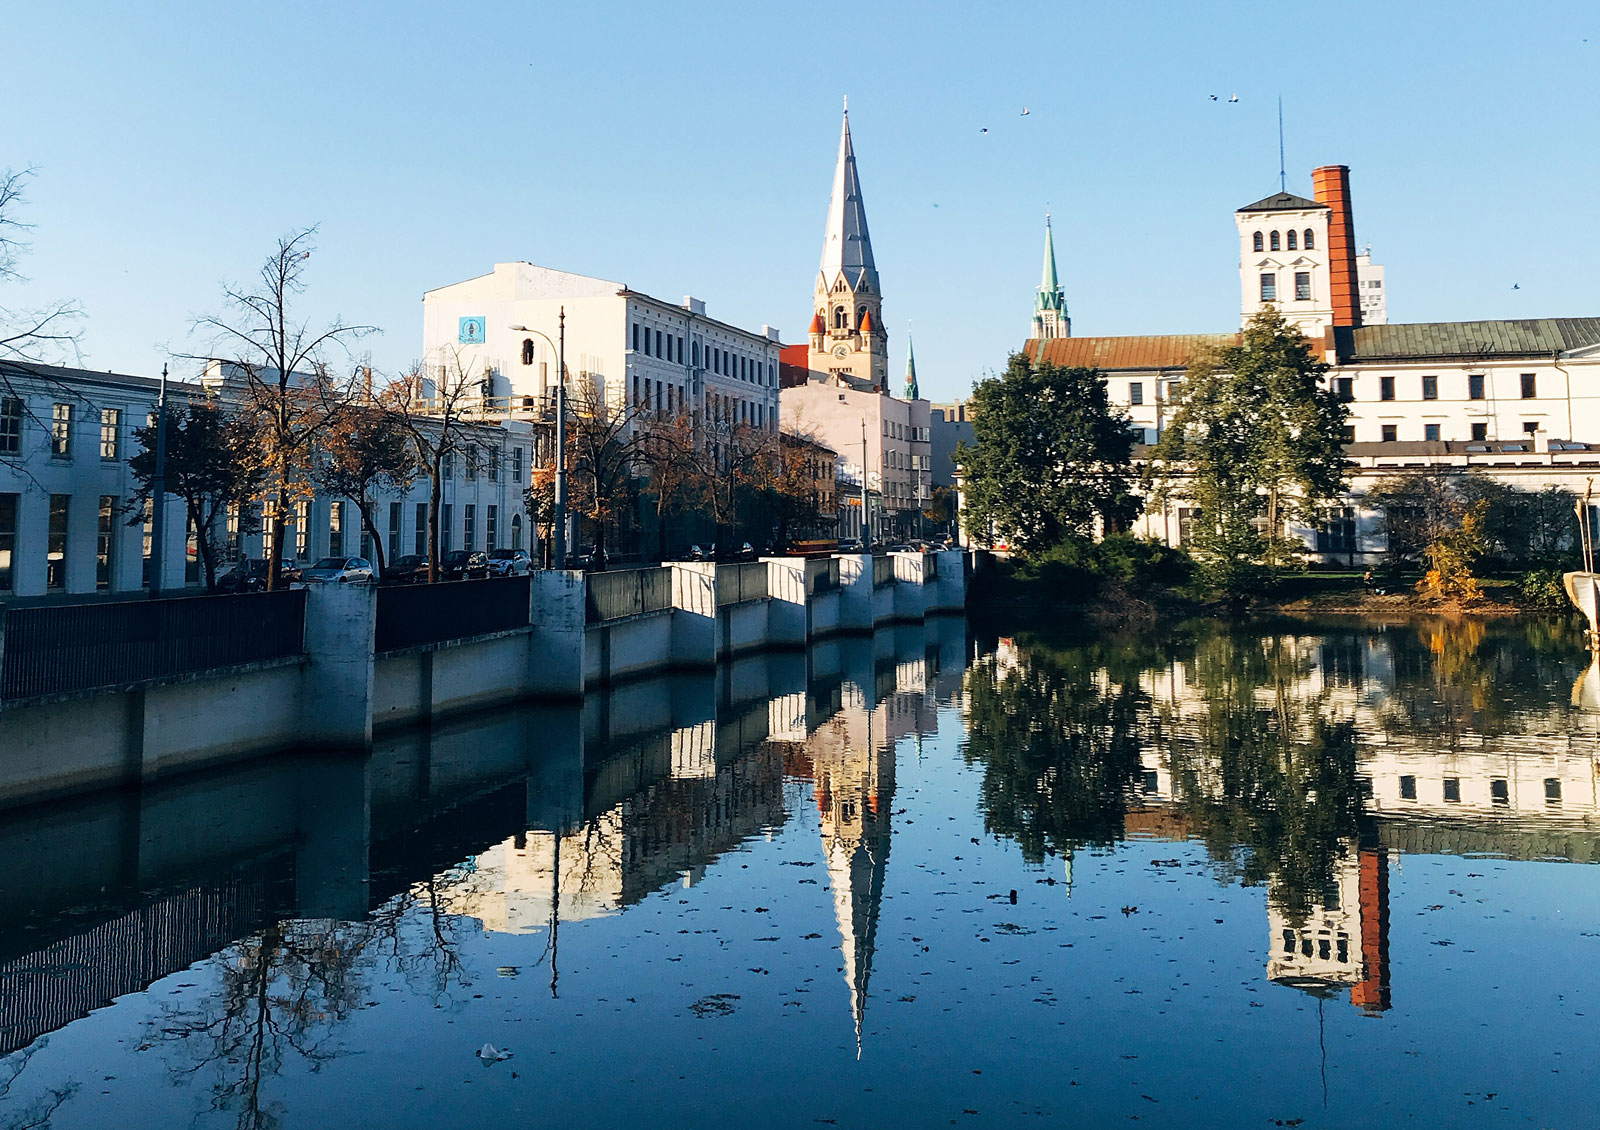 Letter from Olsztyn: the curious, complex history of a German-Polish border town